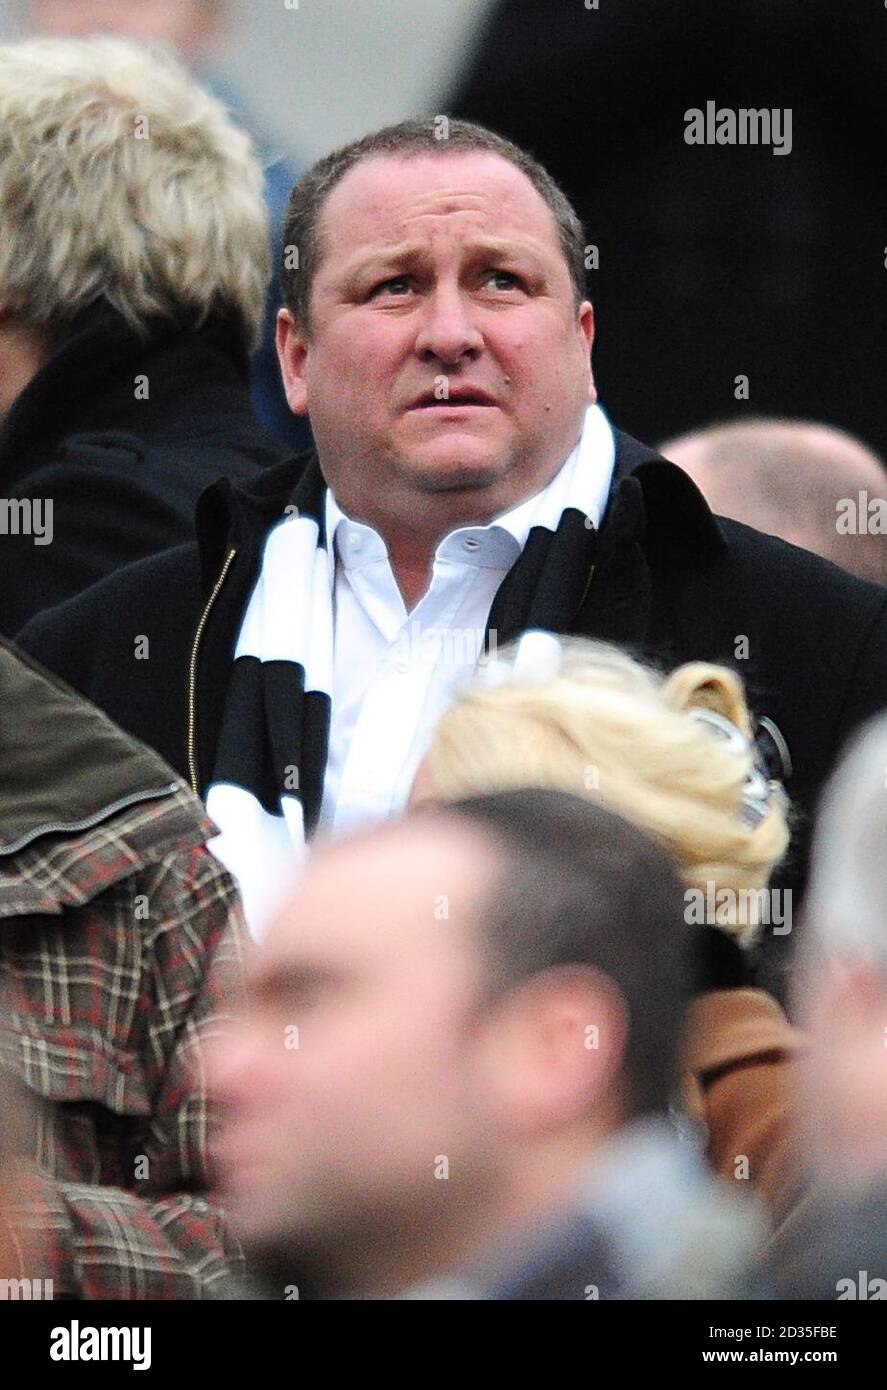 Newcastle United owner Mike Ashley in the stands Stock Photo